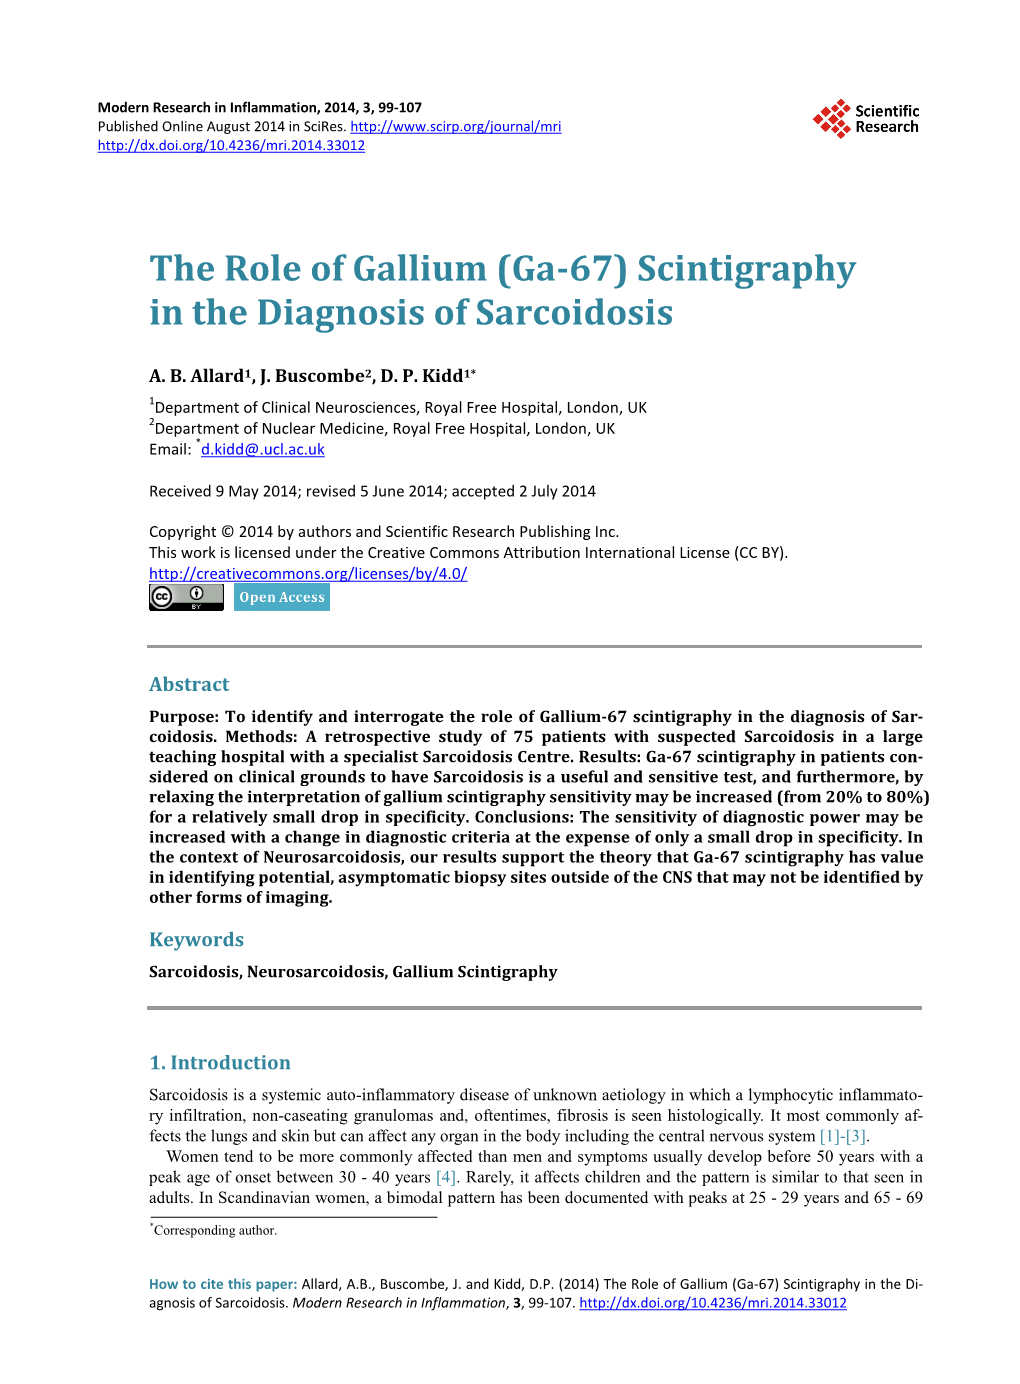 Scintigraphy in the Diagnosis of Sarcoidosis